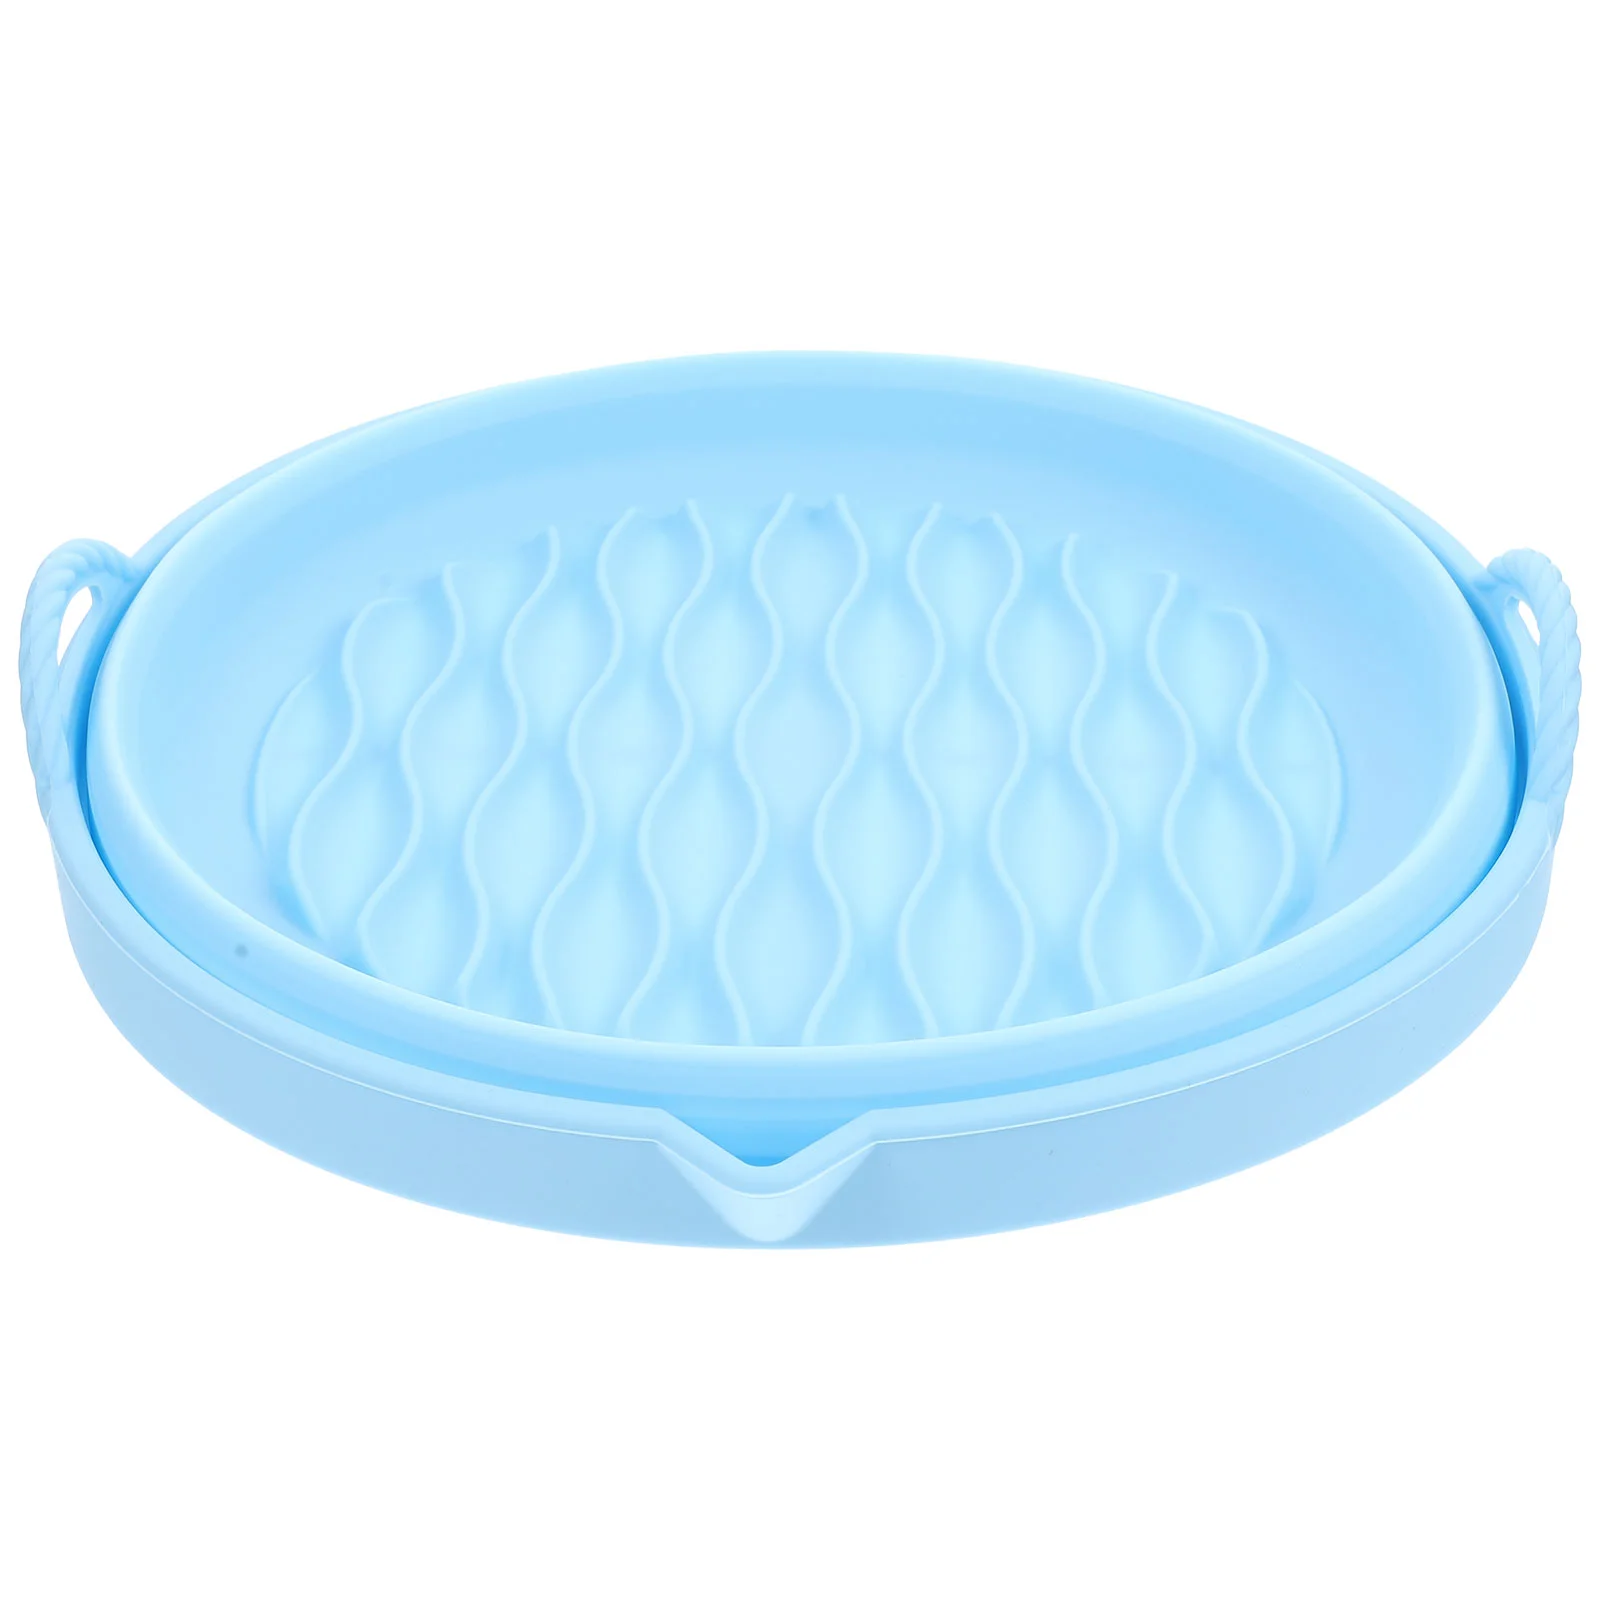 

Air Fryee Oven Circular Tray Wok Nonstick Silicone Cooker Pot Grilling Table Air Fryer Cake Pan Liner Air Fryer Pan